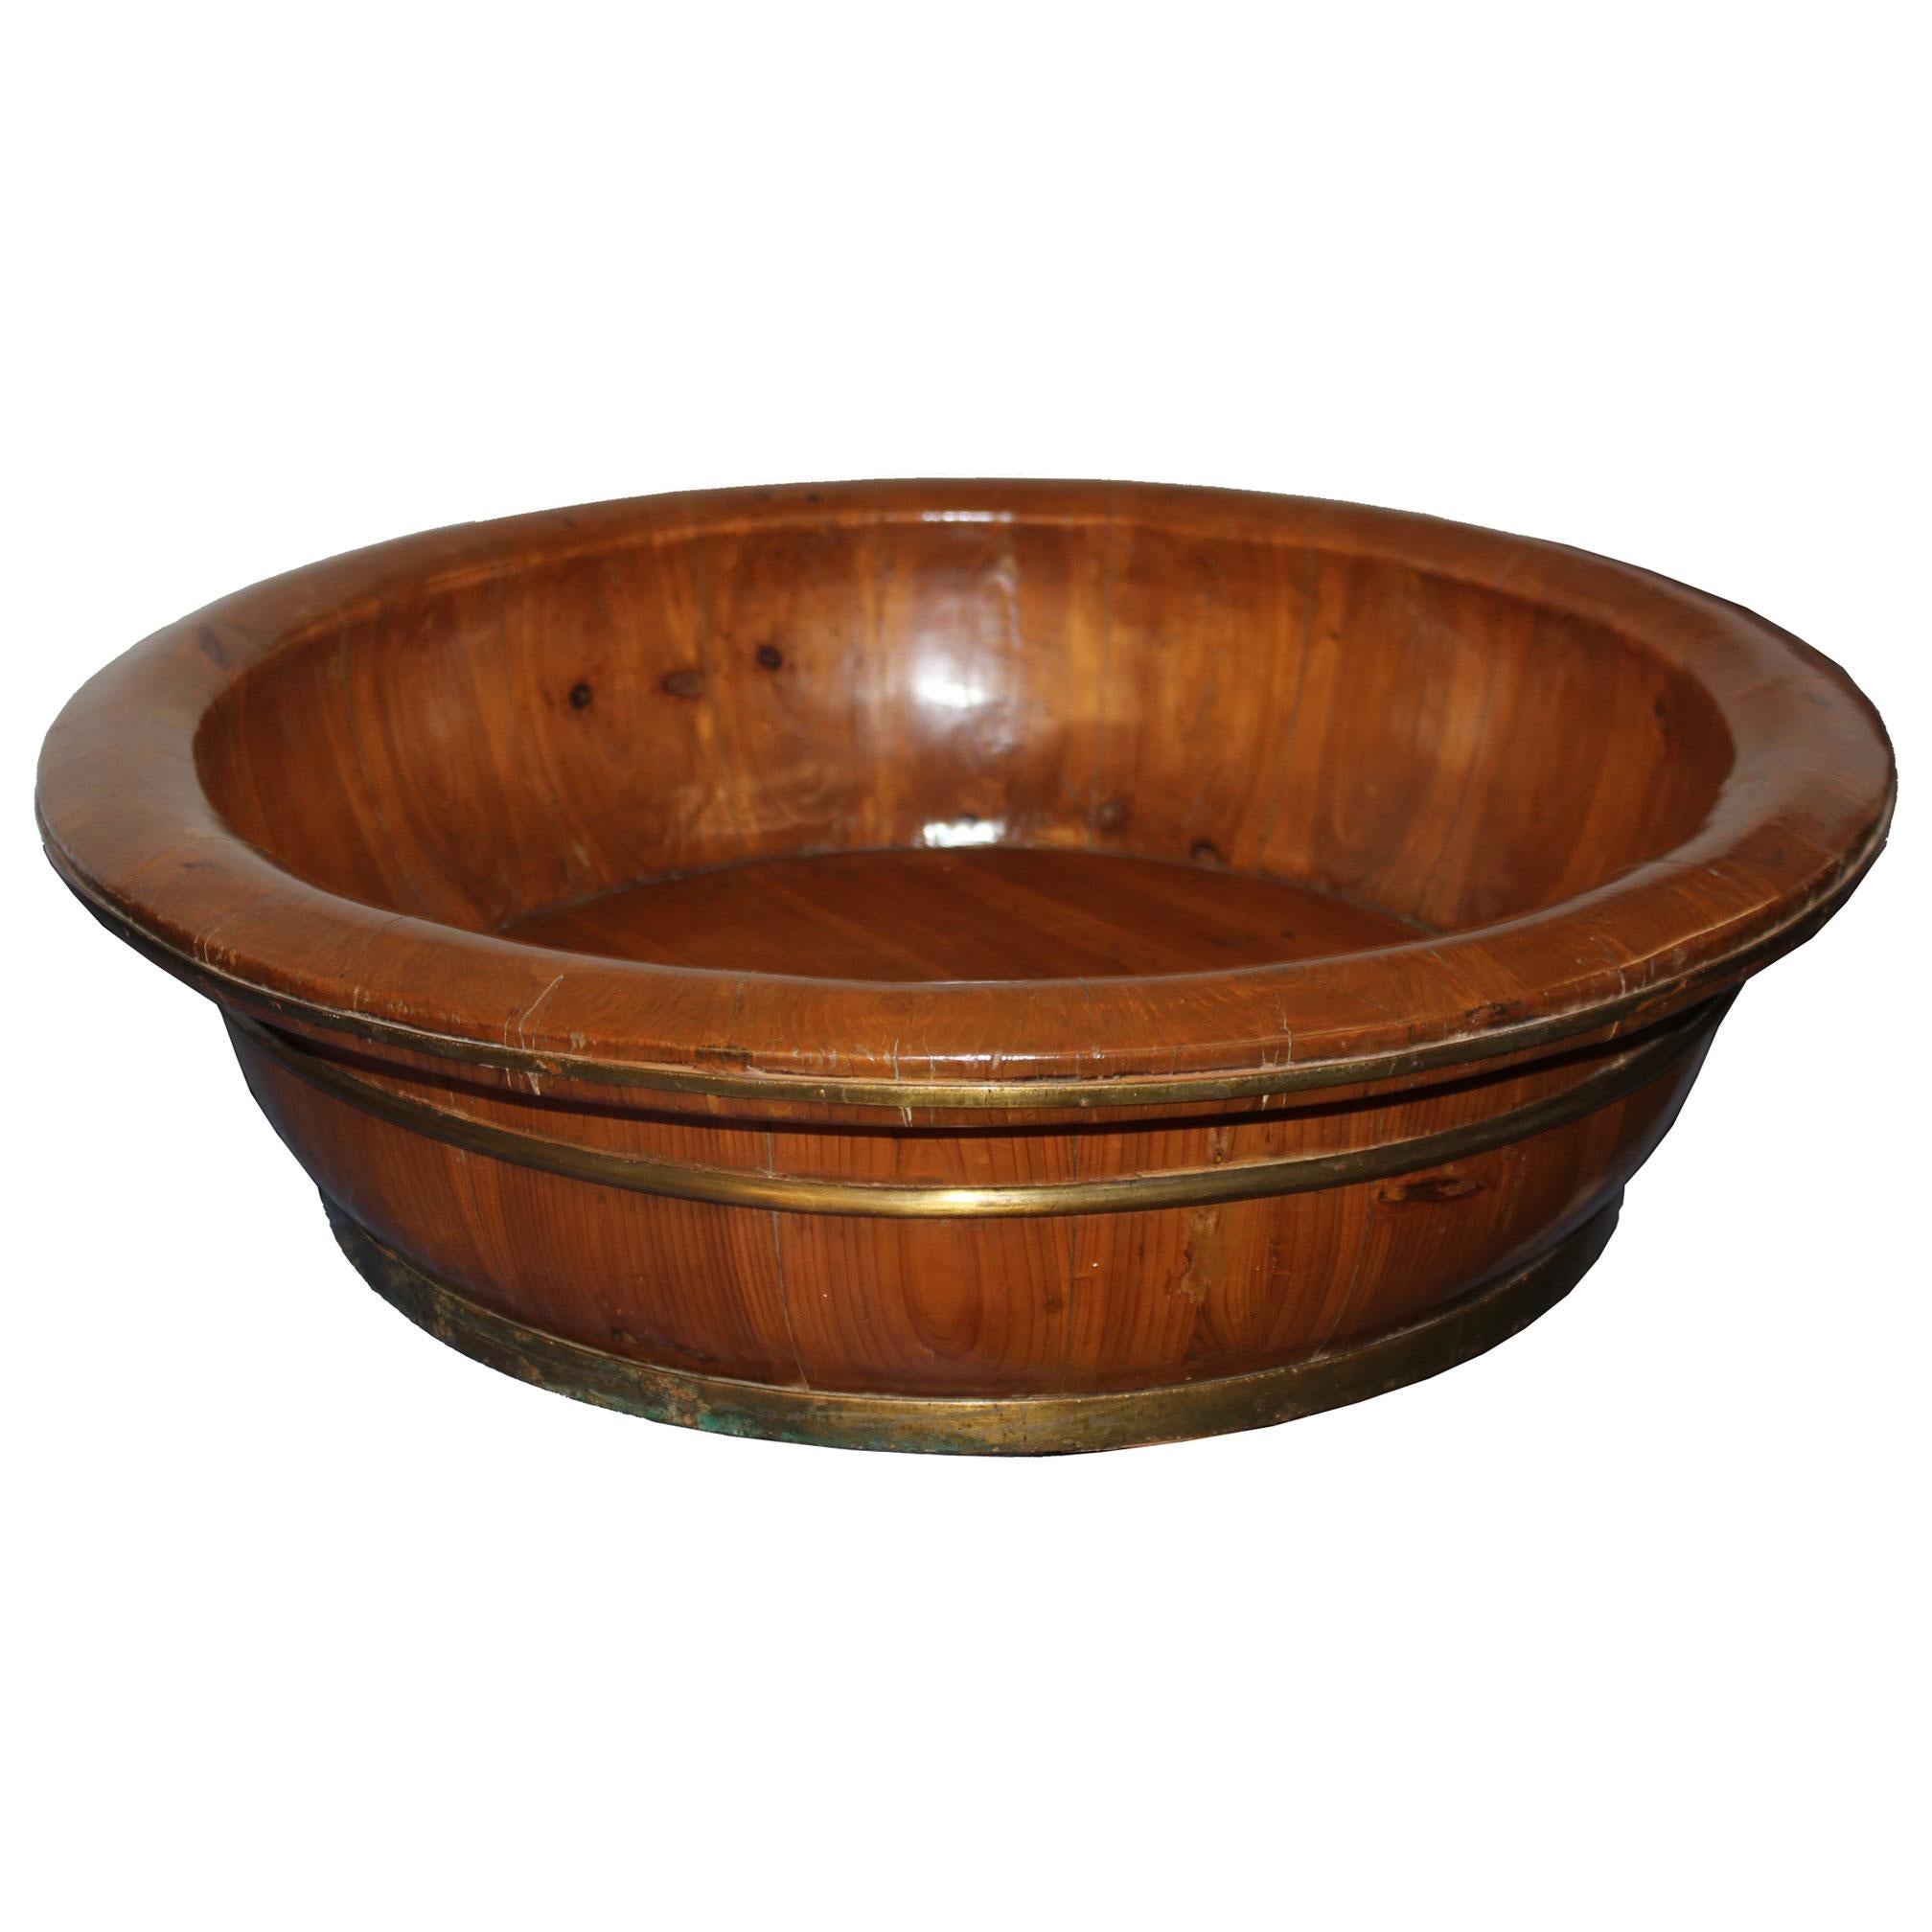 Large vintage elm wood baby bathtub with bronze rings on the outside can be used to display plants or orchids on a dining room table.